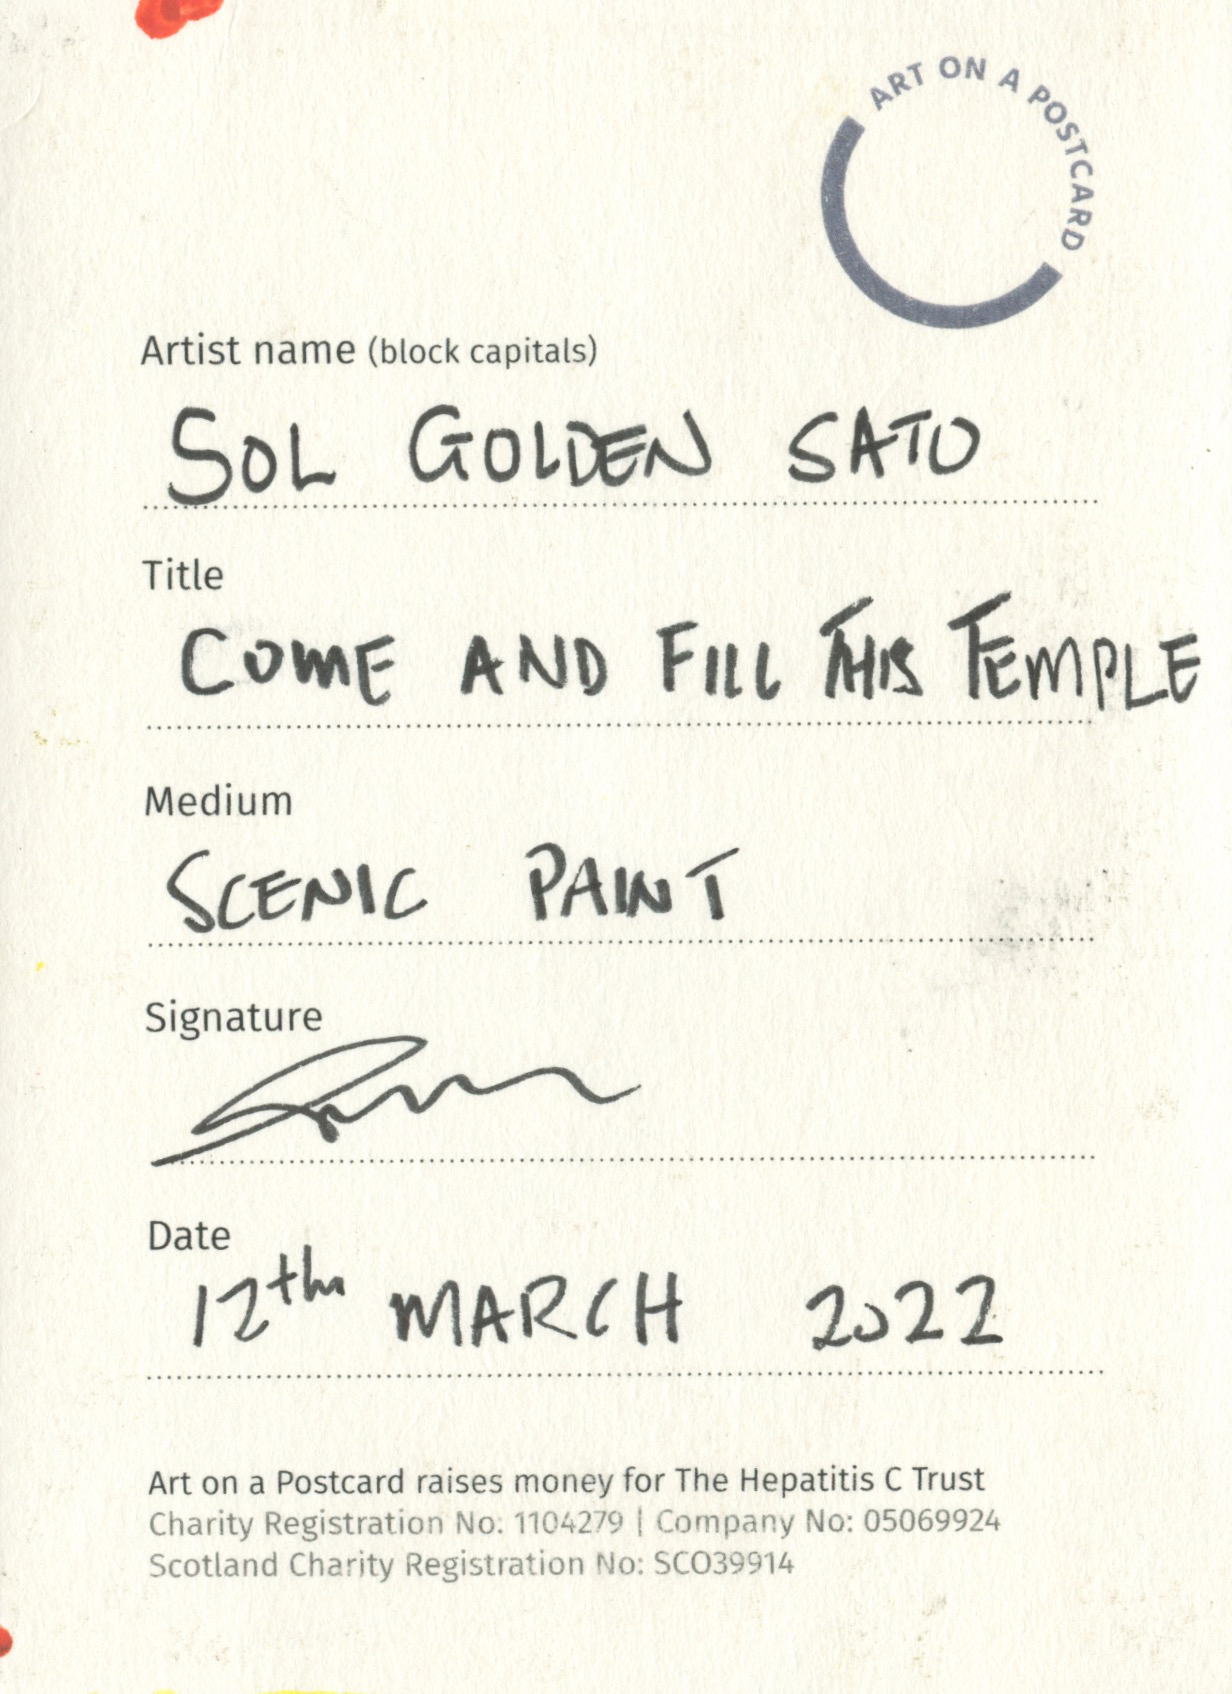 2. Sol Golden Sato - Come and Fill This Temple - BACK